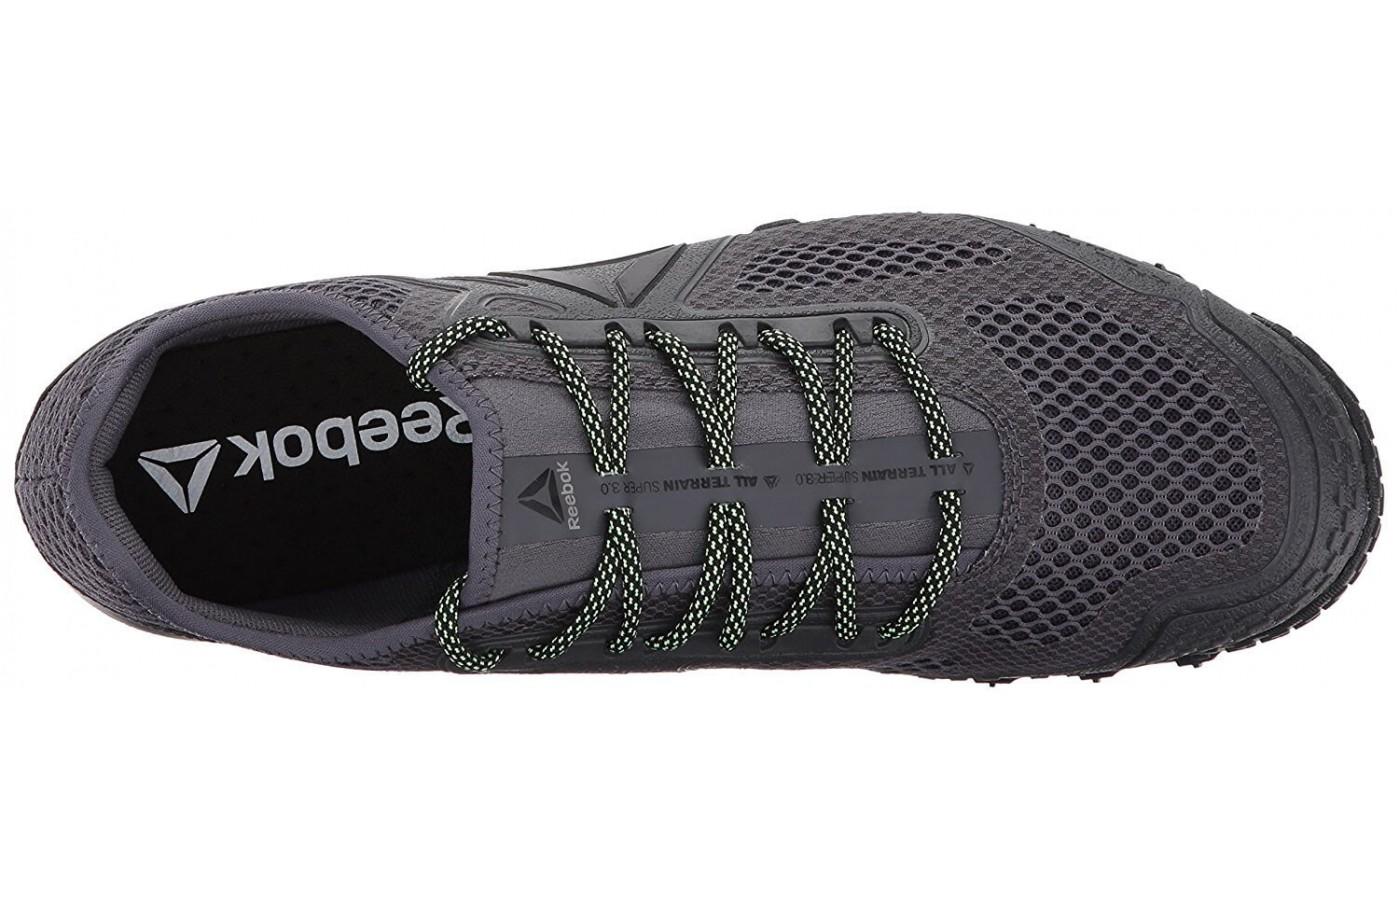 The unique lacing system add support and comfort. 